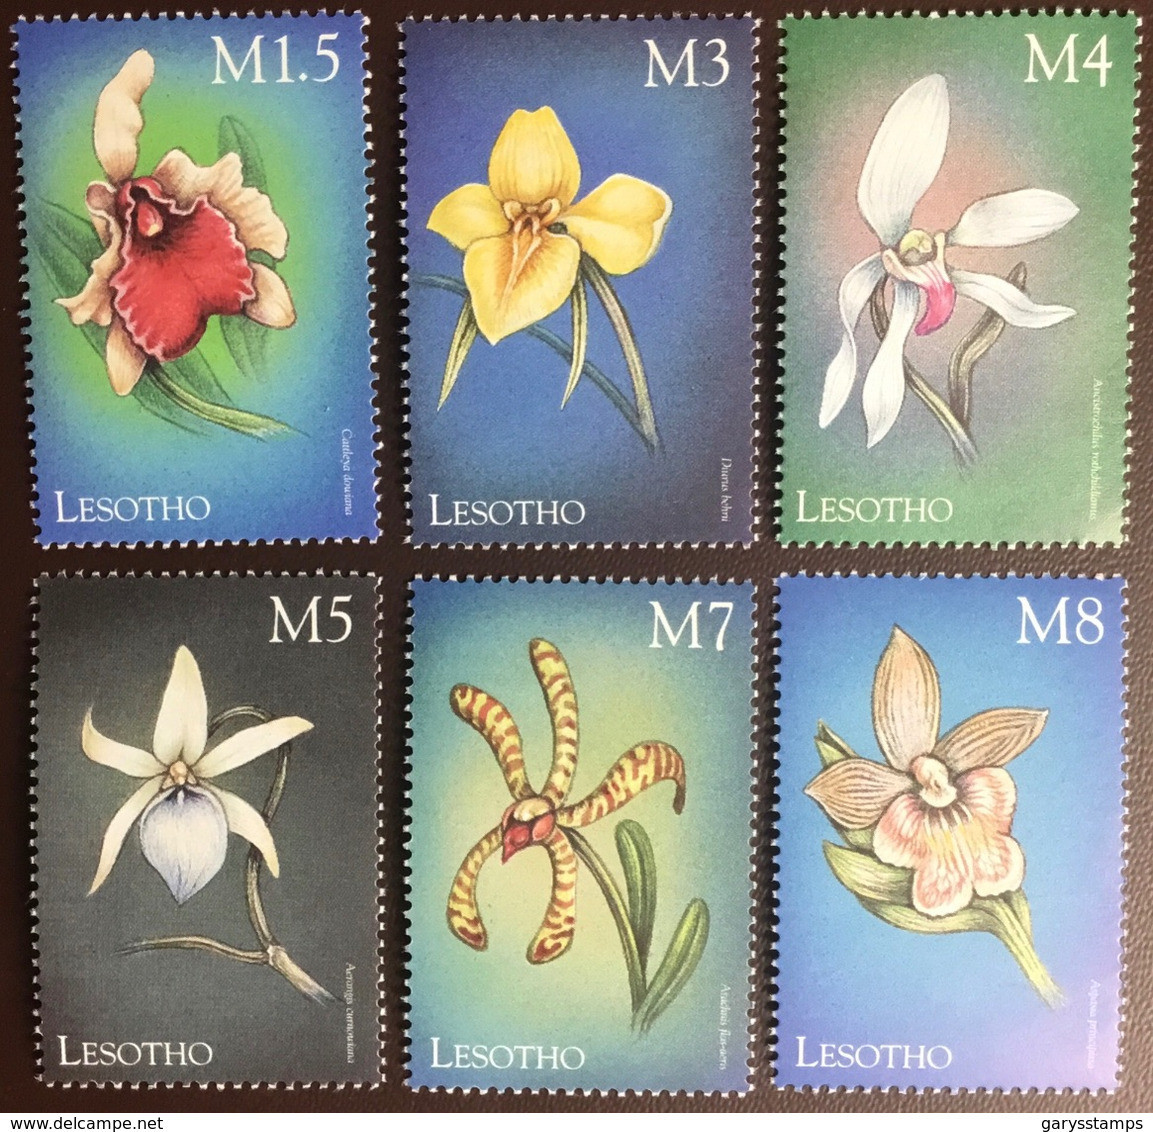 Lesotho 1999 Orchids Flowers MNH - Orchids